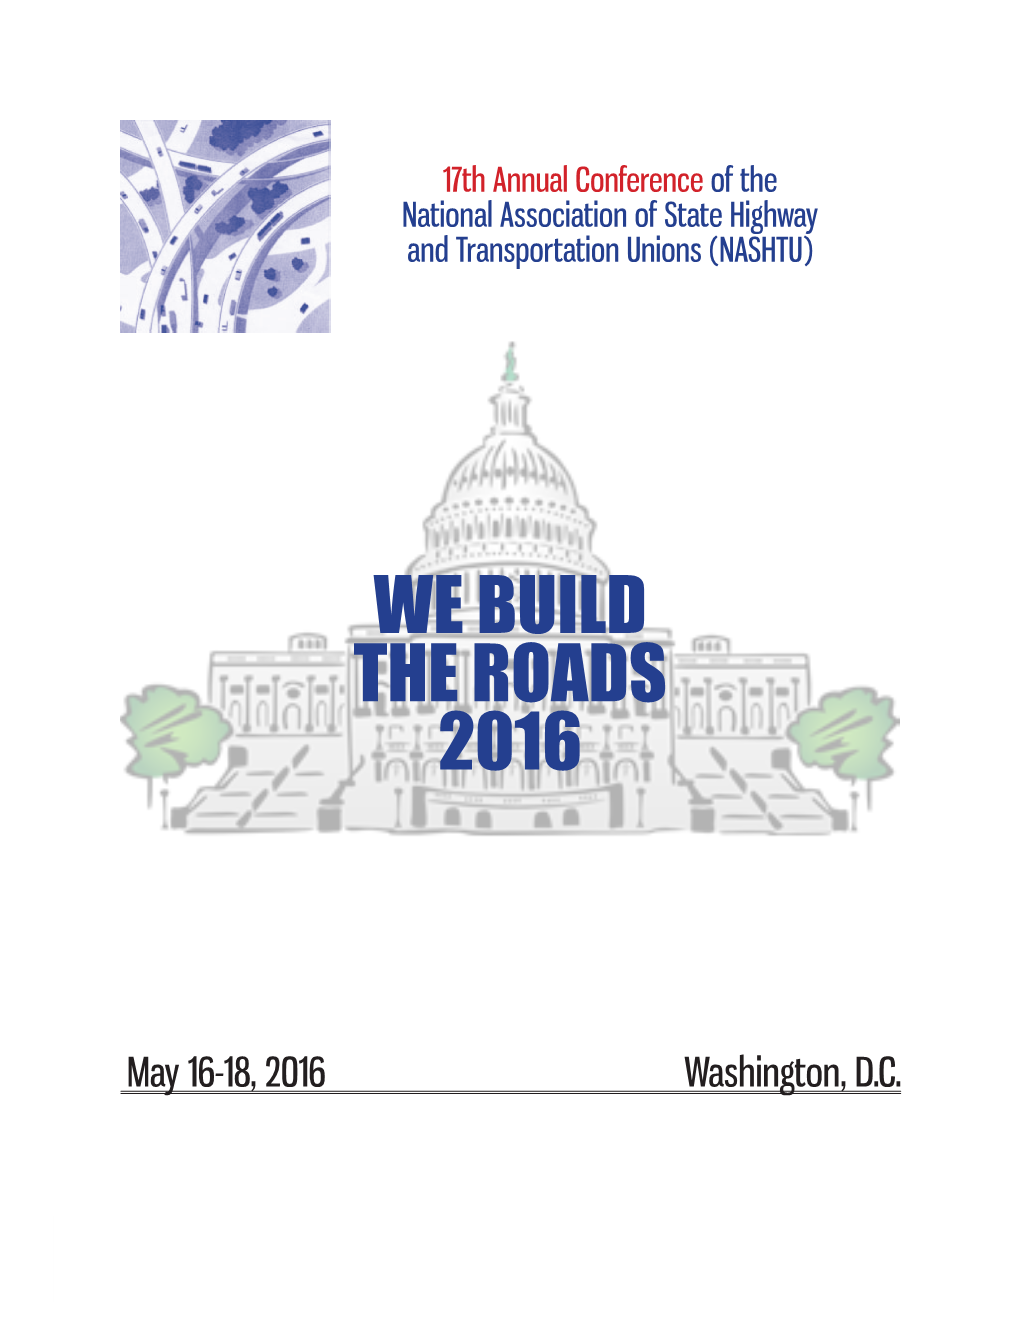 We Build the Roads 2016